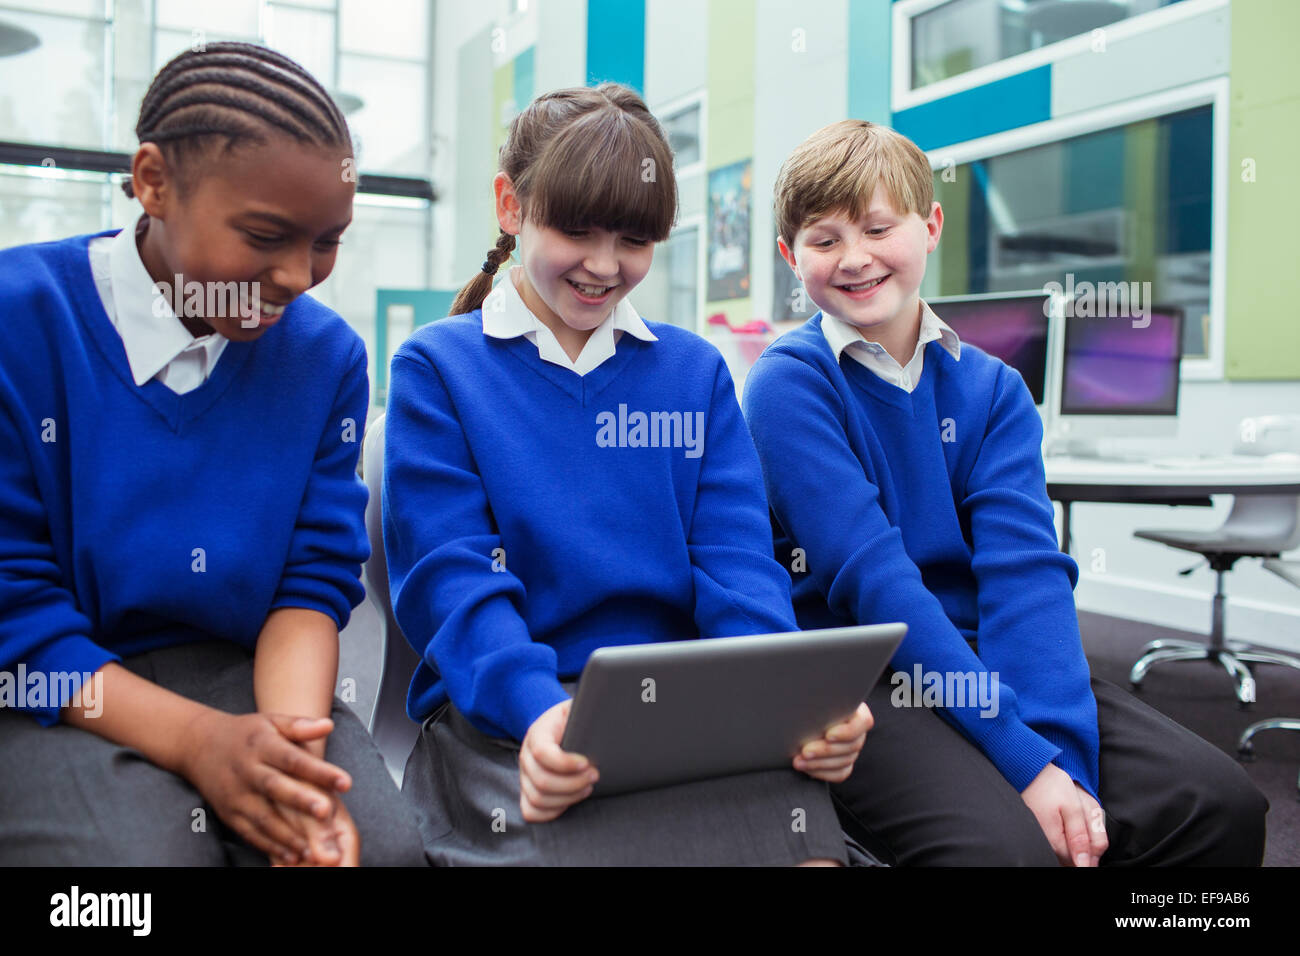 Primary school children wearing blue school uniforms holding digital tablet and smiling in classroom Stock Photo